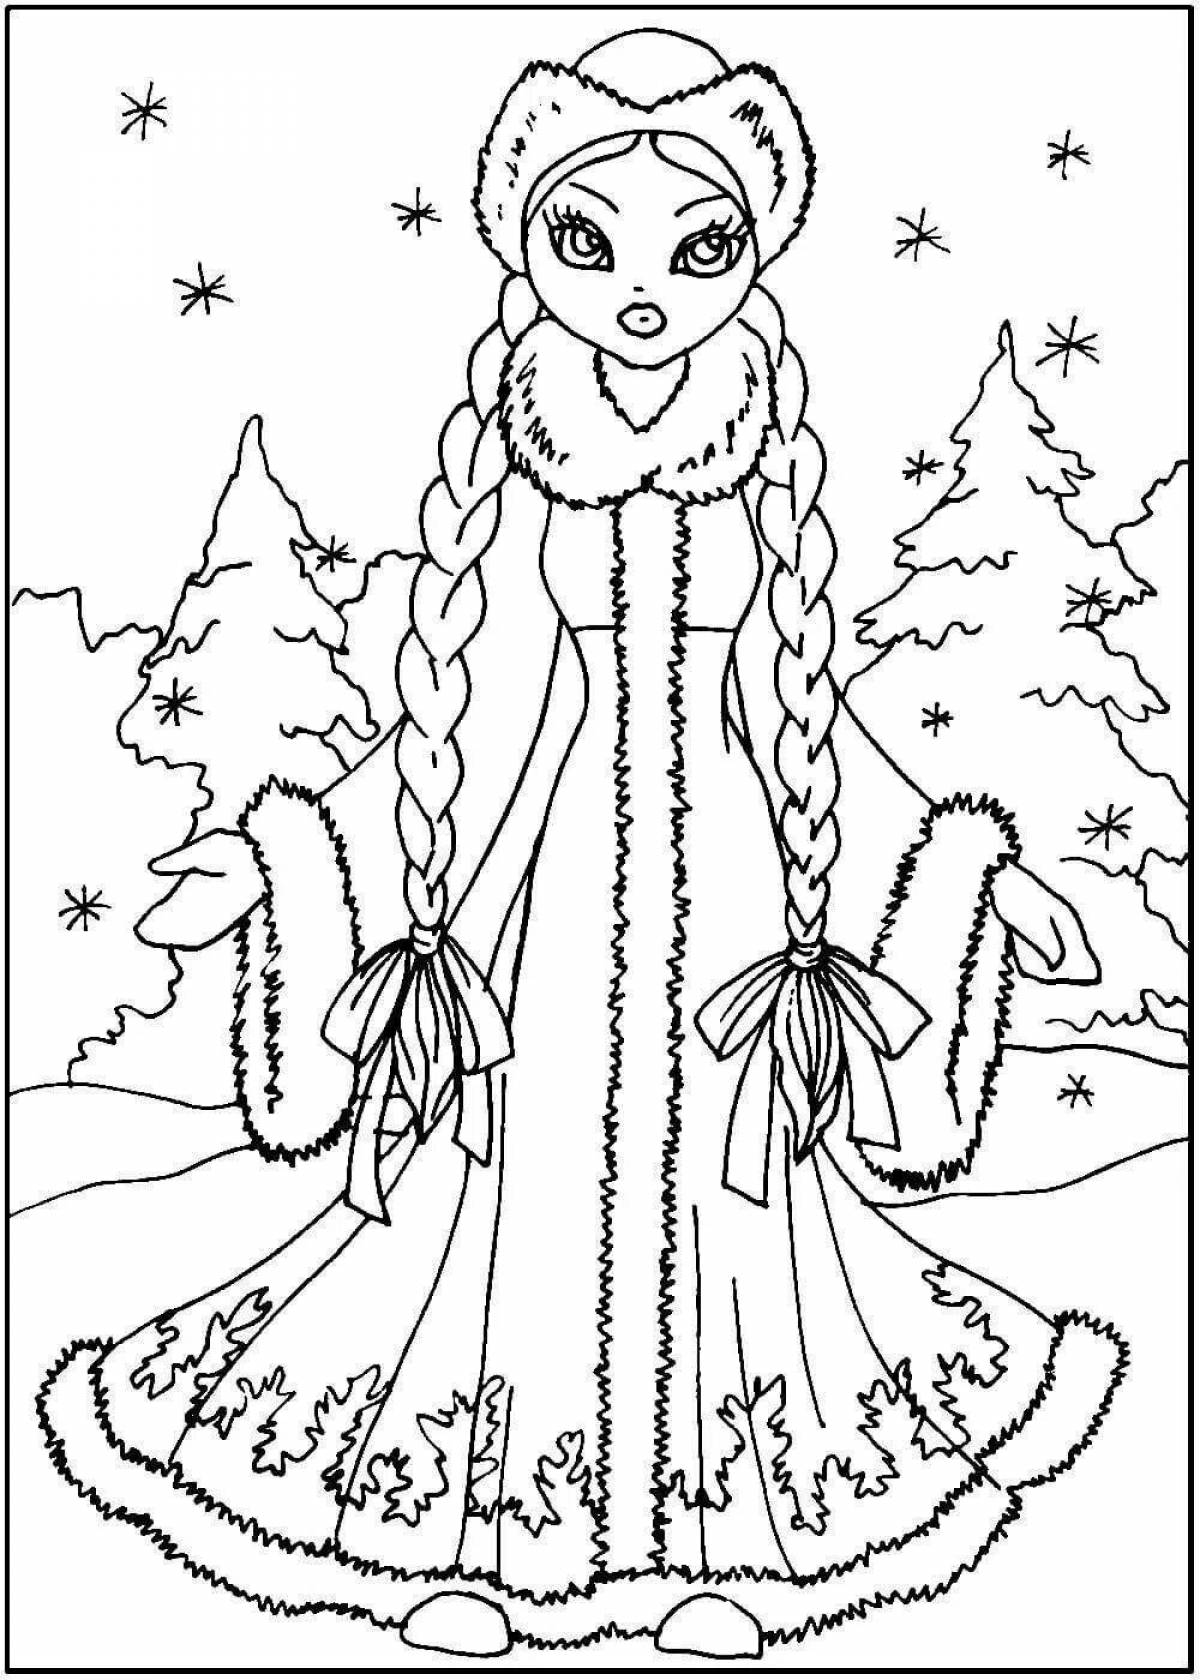 Impressive coloring drawing of a snow maiden